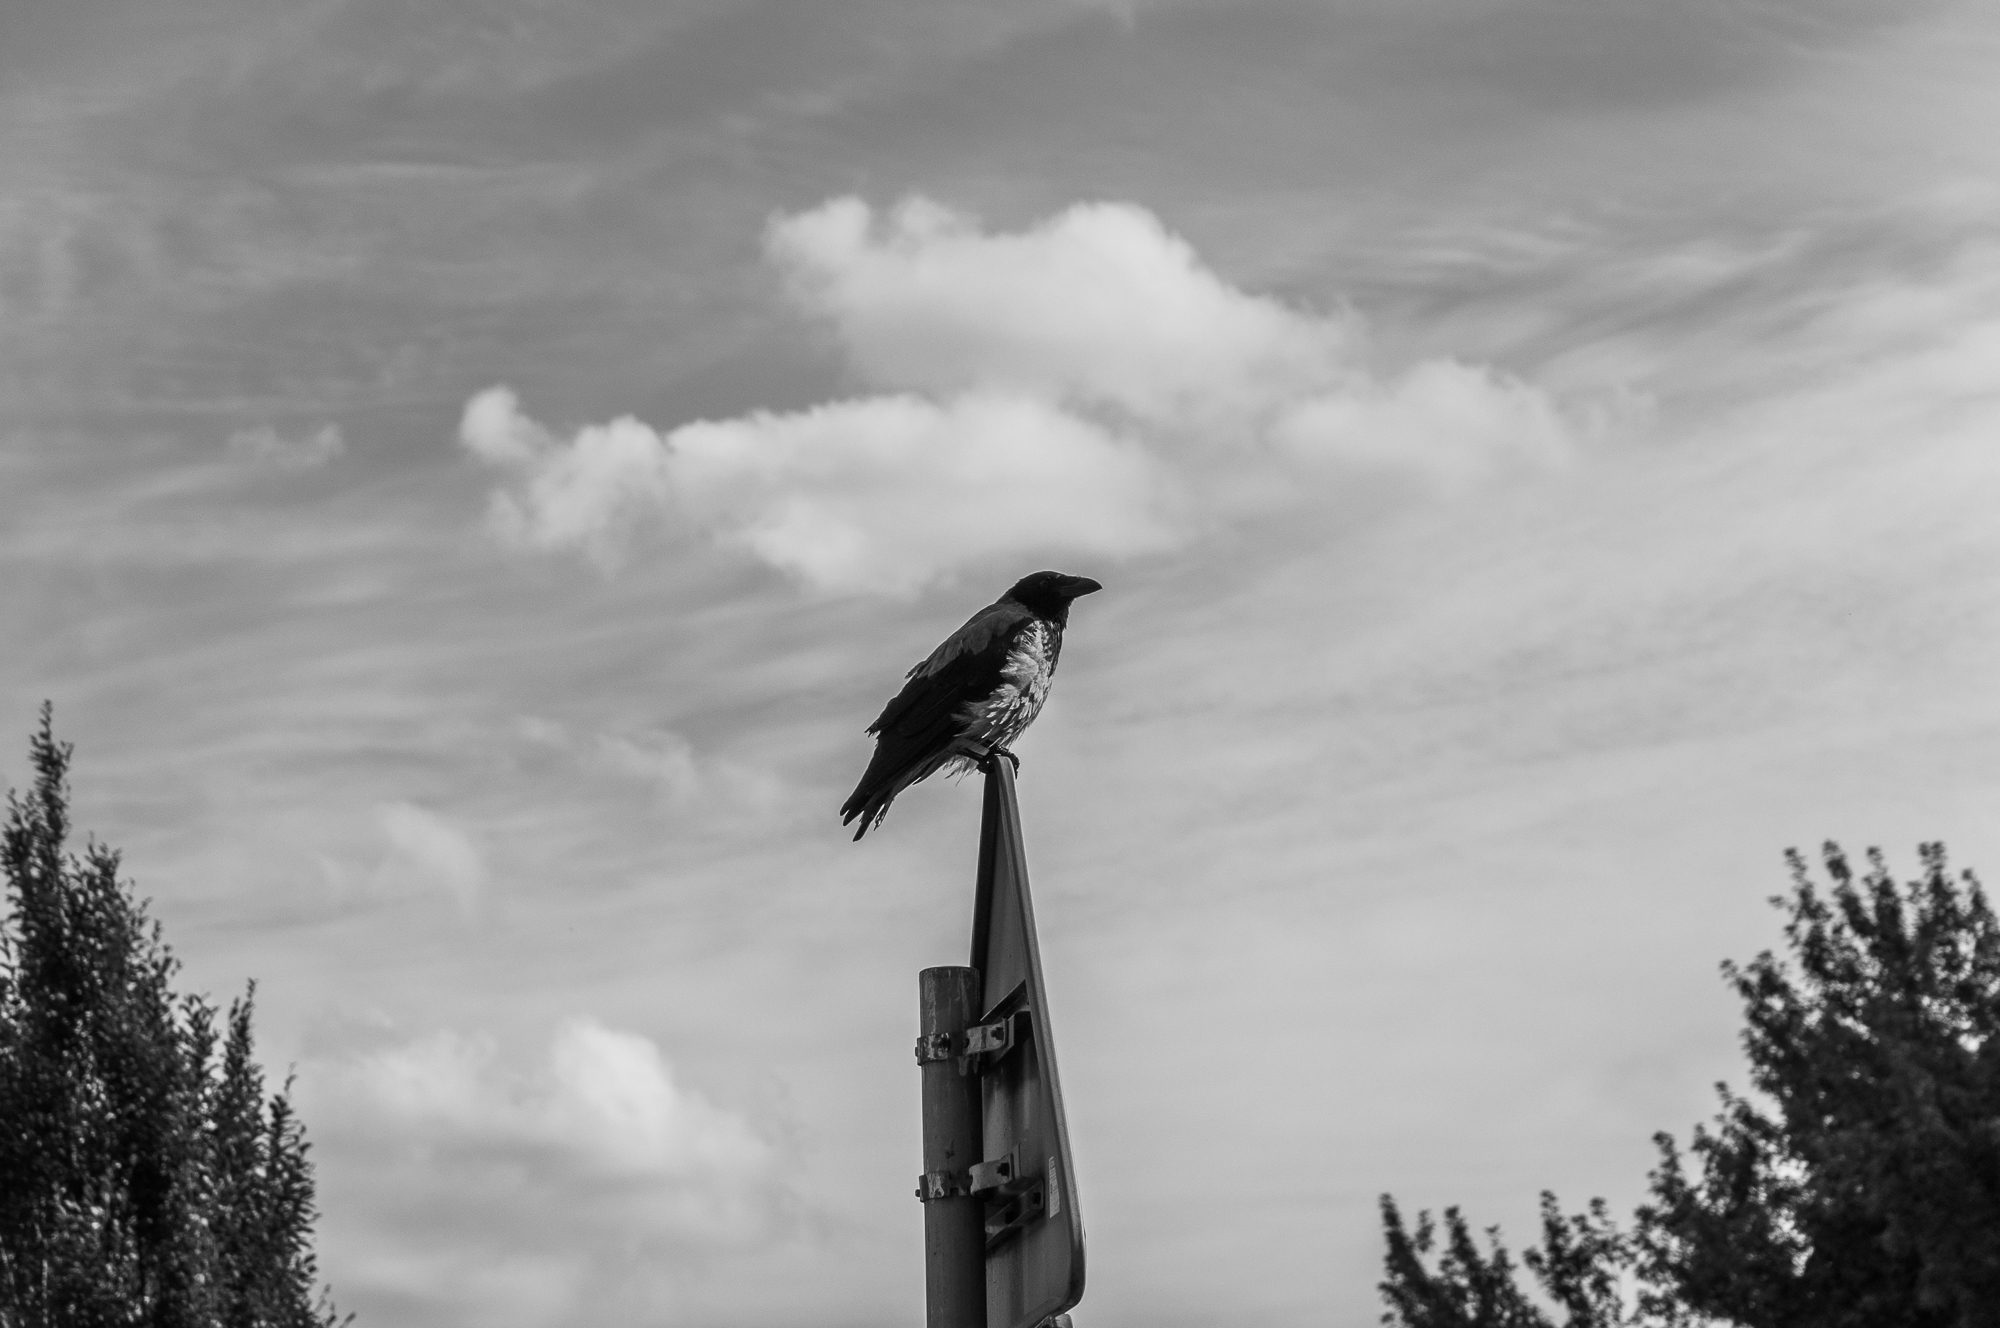 Adam Mazek Photography 2022. Warsaw Street Photography. Post: "The 10th day in a row when I was doing street photography." Birds. Animals.